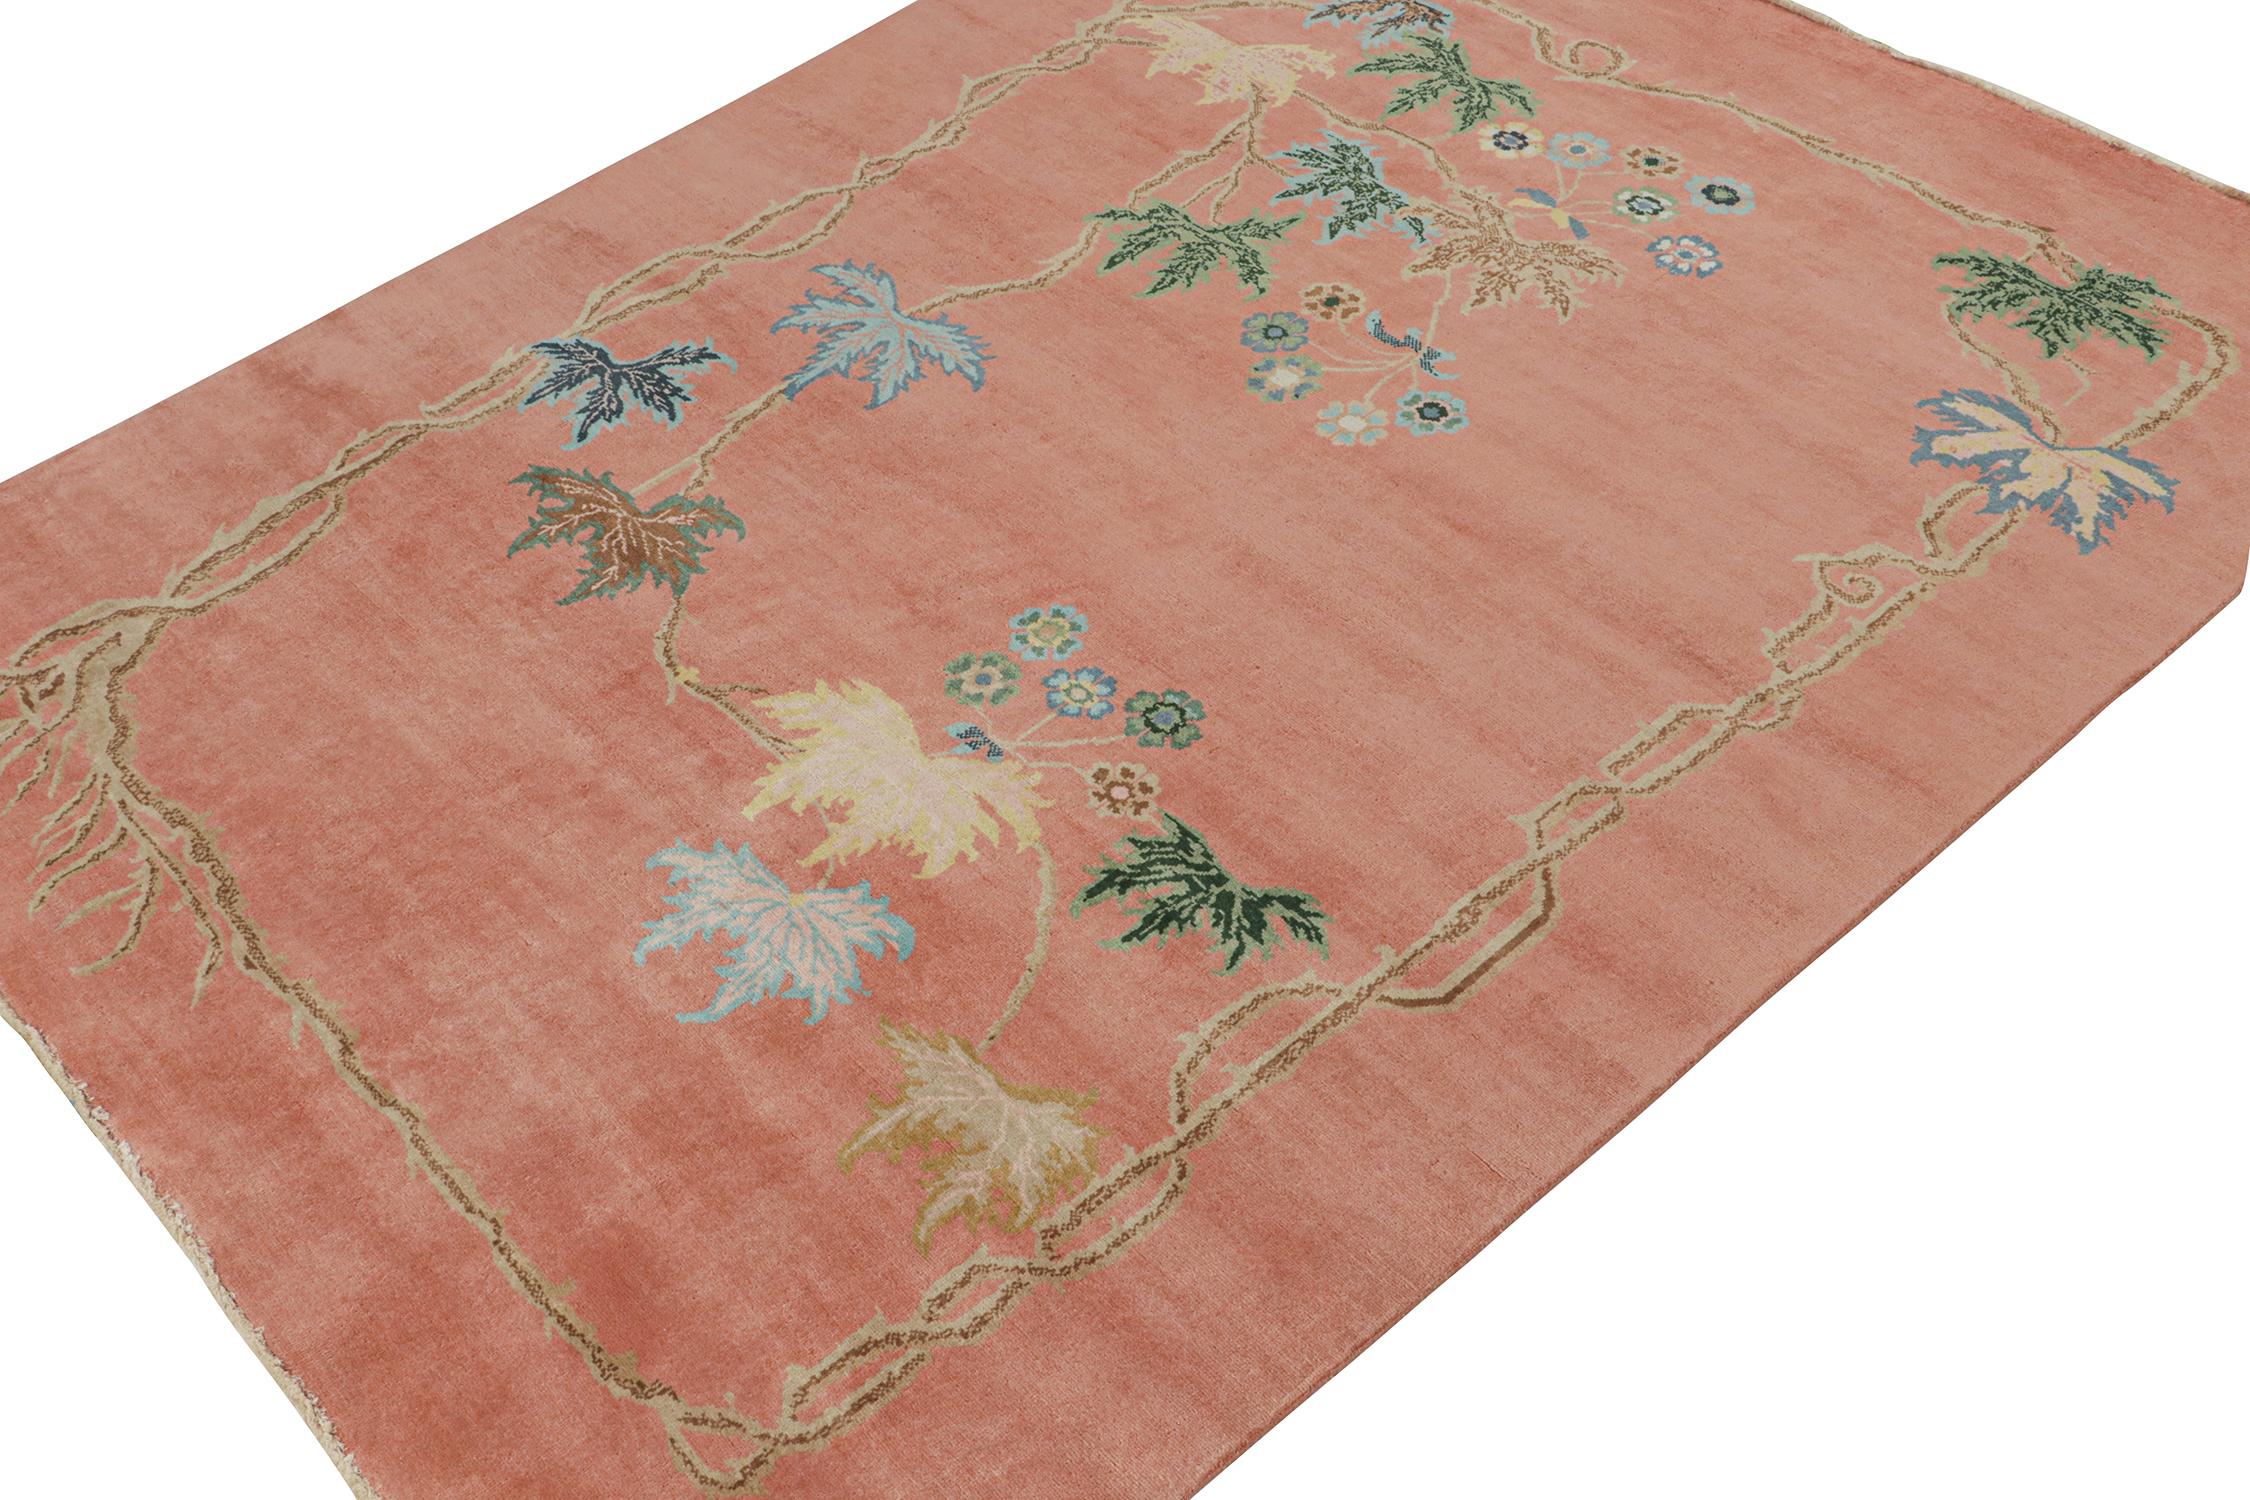 This 8x10 ode to Chinese Art Deco rugs is the next addition to Rug & Kilim's inspired new Deco Collection. 

Further On the Design:

The piece enjoys an emphasis on a warm pink background with finely detailed floral patterns within. Connoisseurs